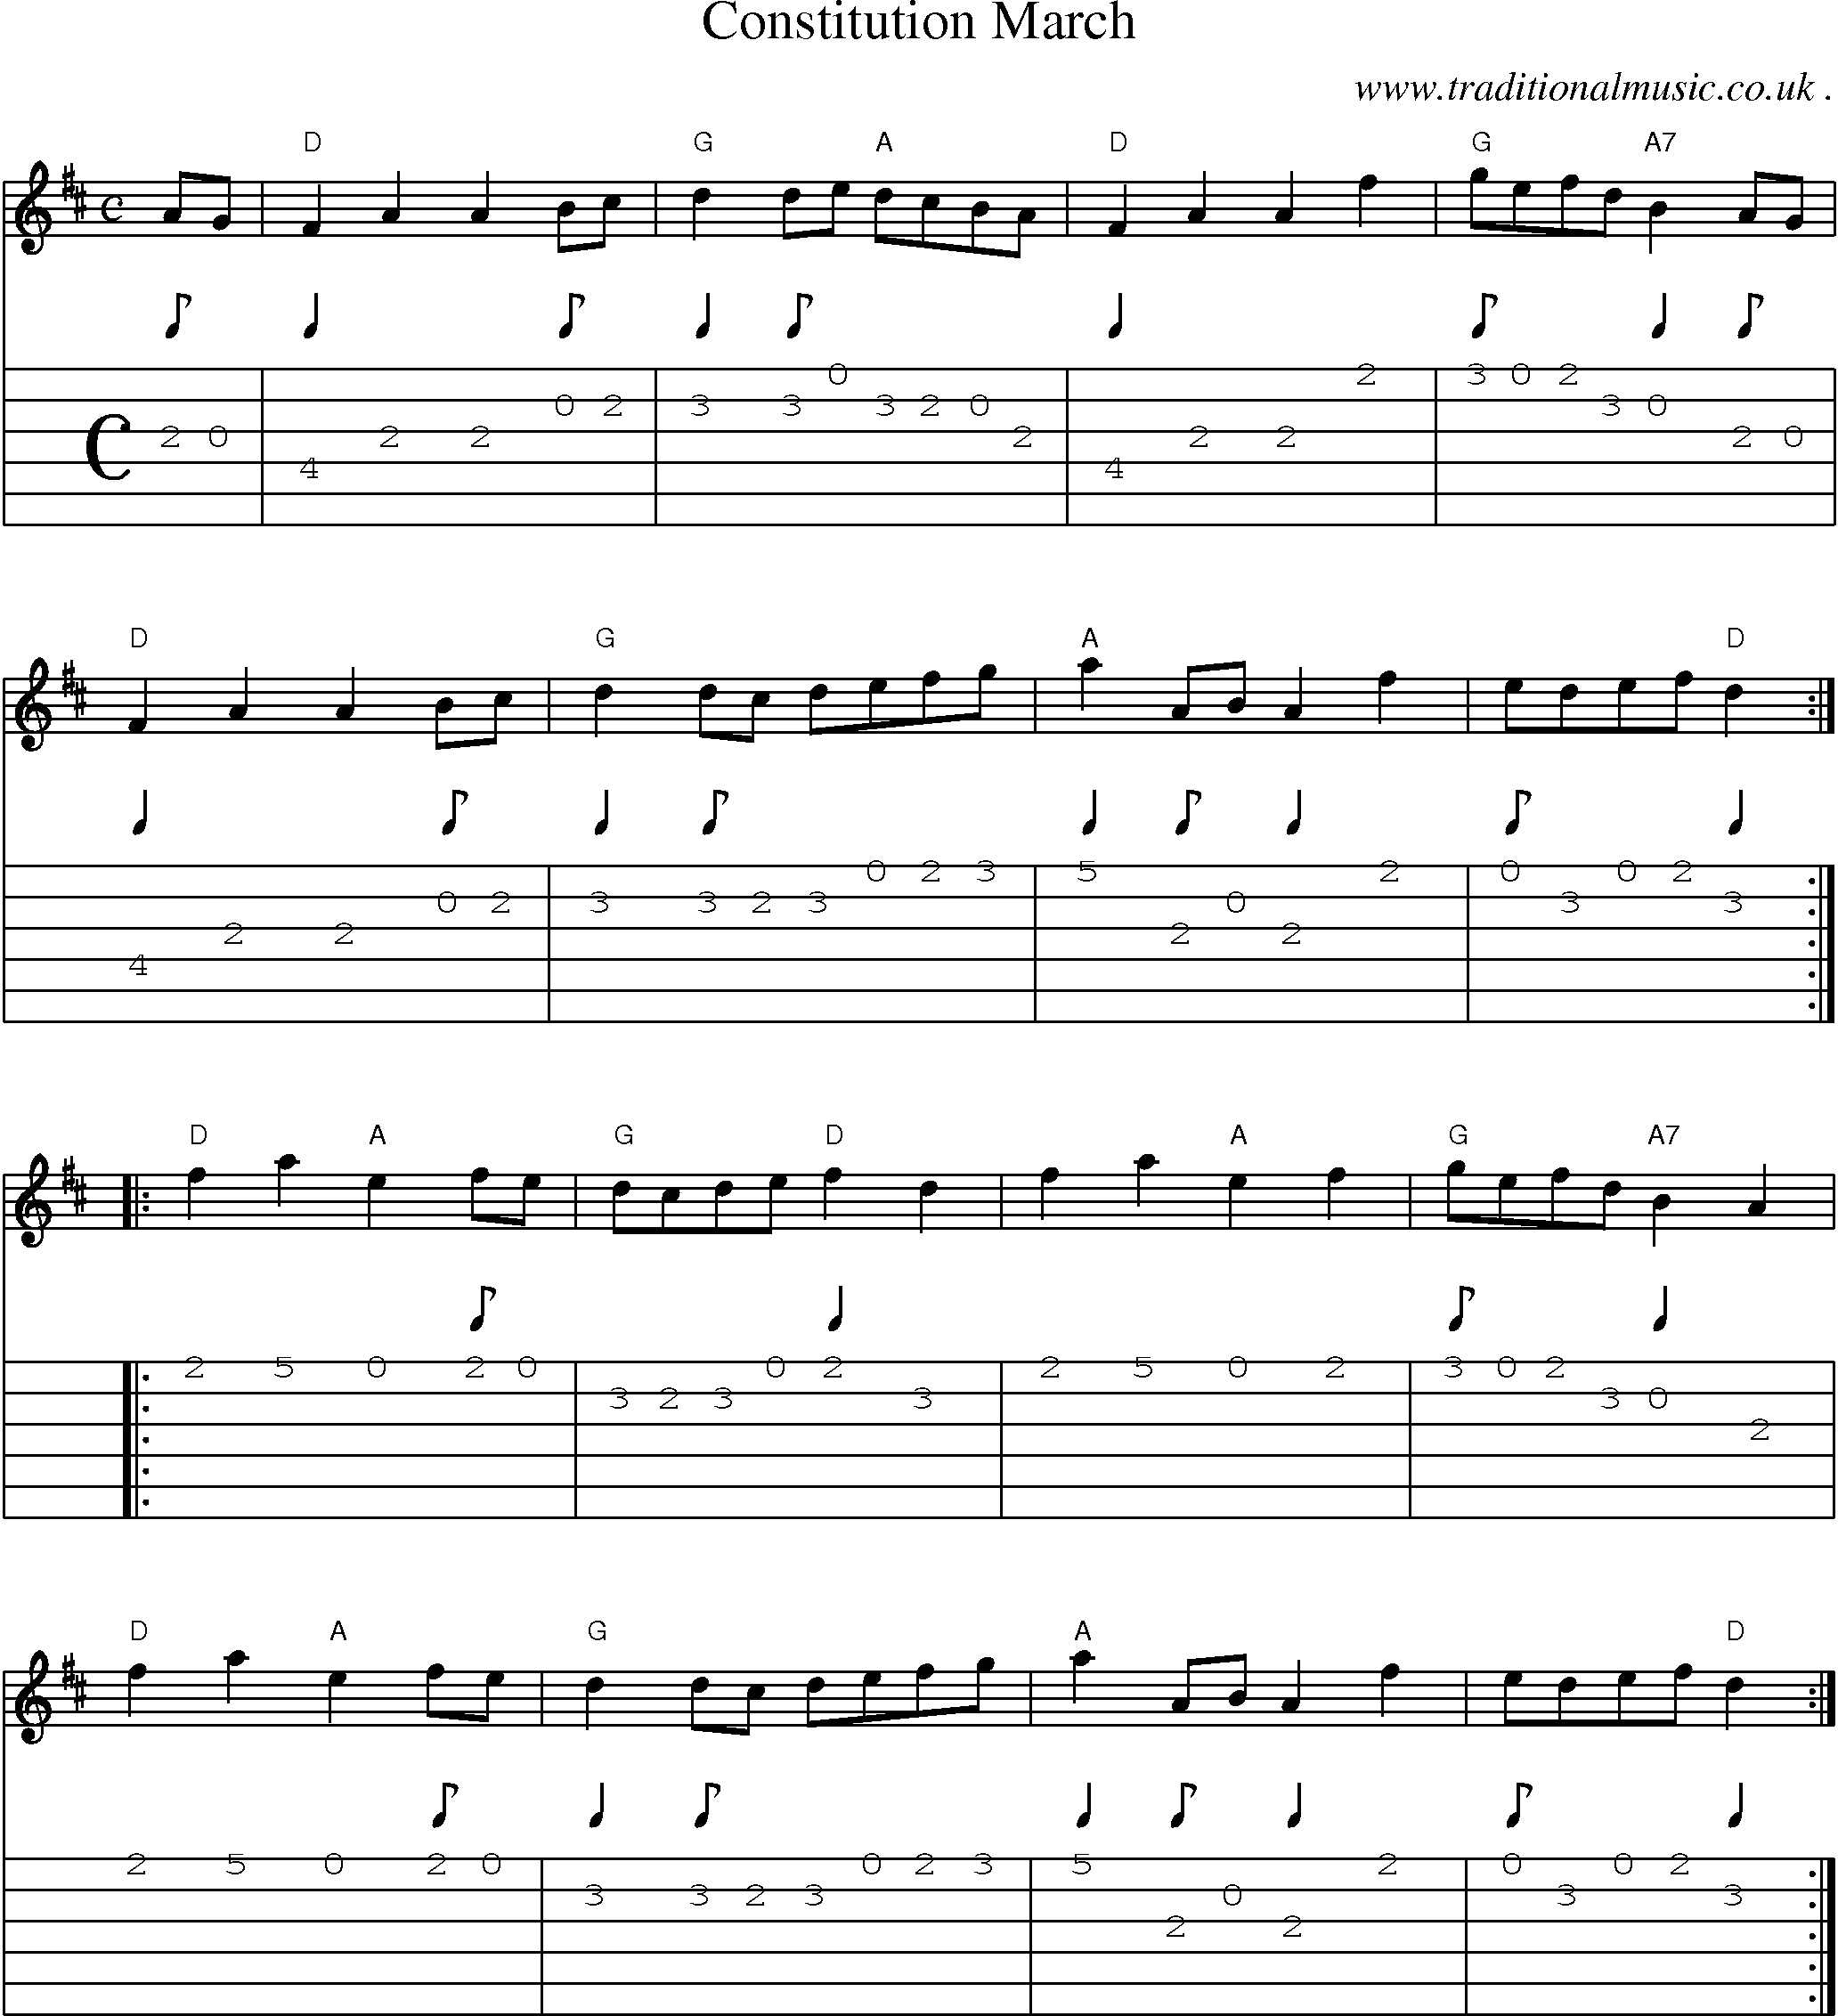 Music Score and Guitar Tabs for Constitution March